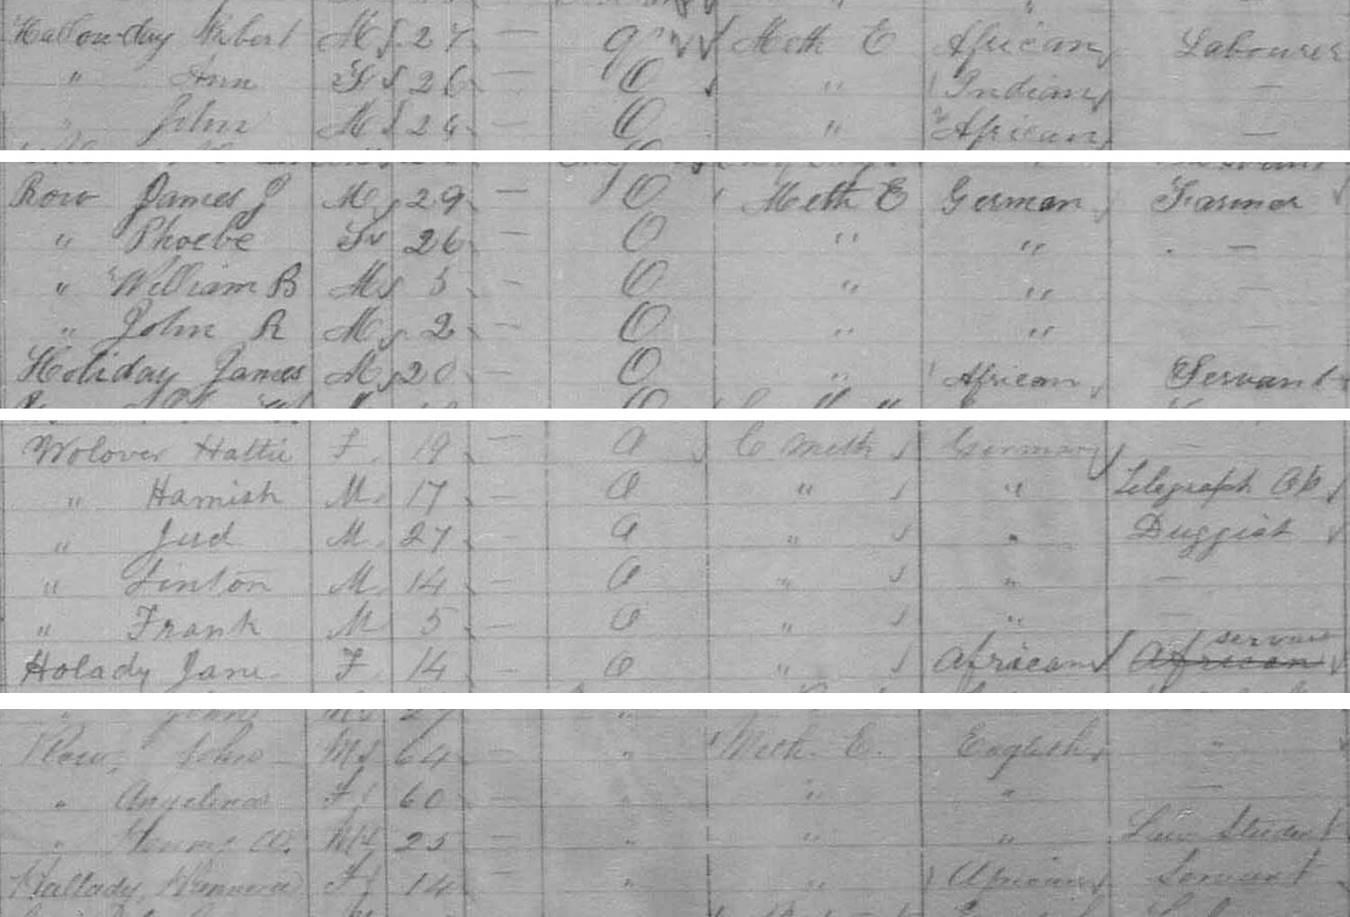 1881 census information for Halliday family